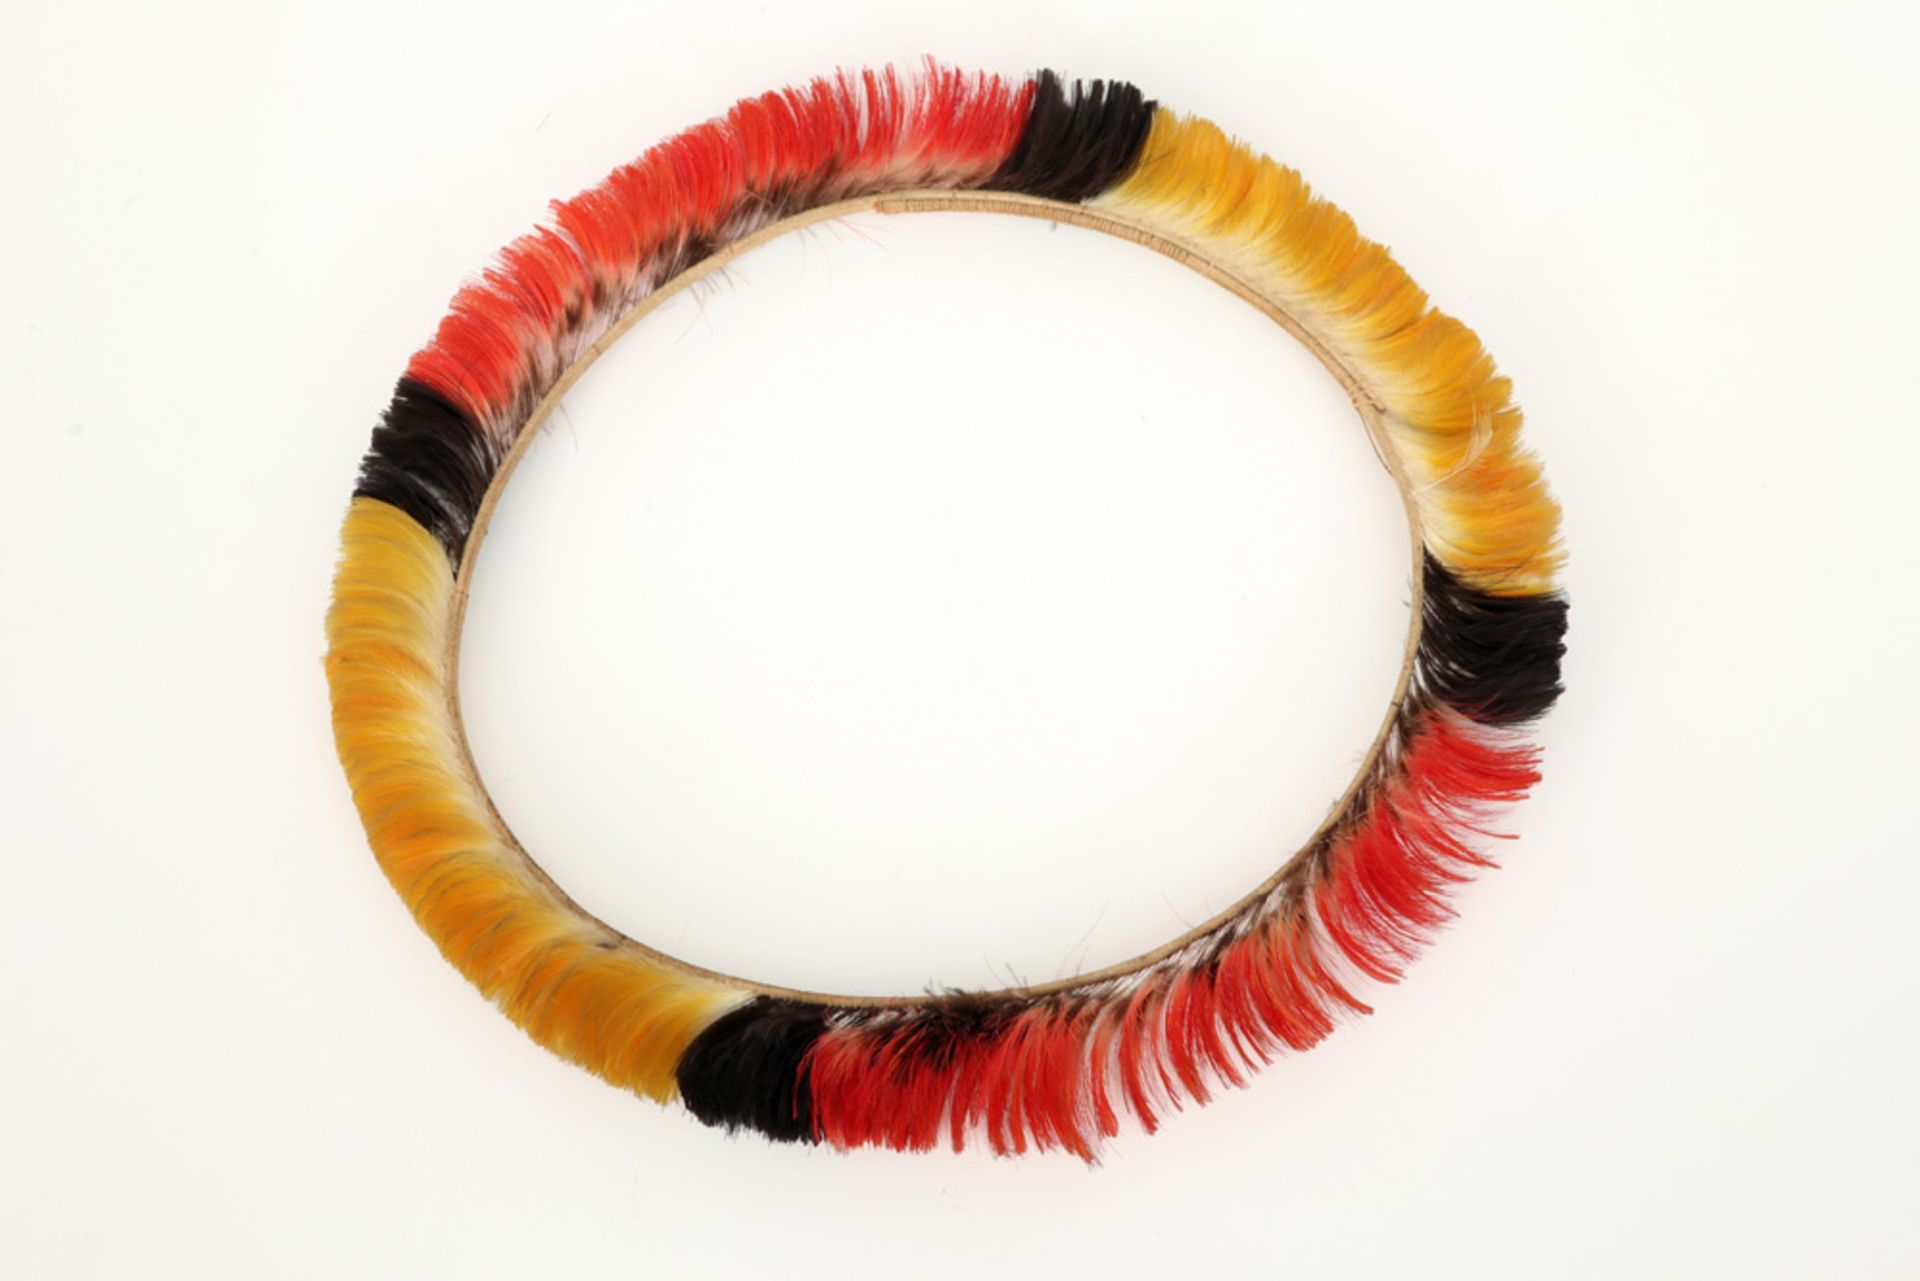 ethnic headband of the Wayana - Indians made of colorful feathers - Bild 2 aus 2